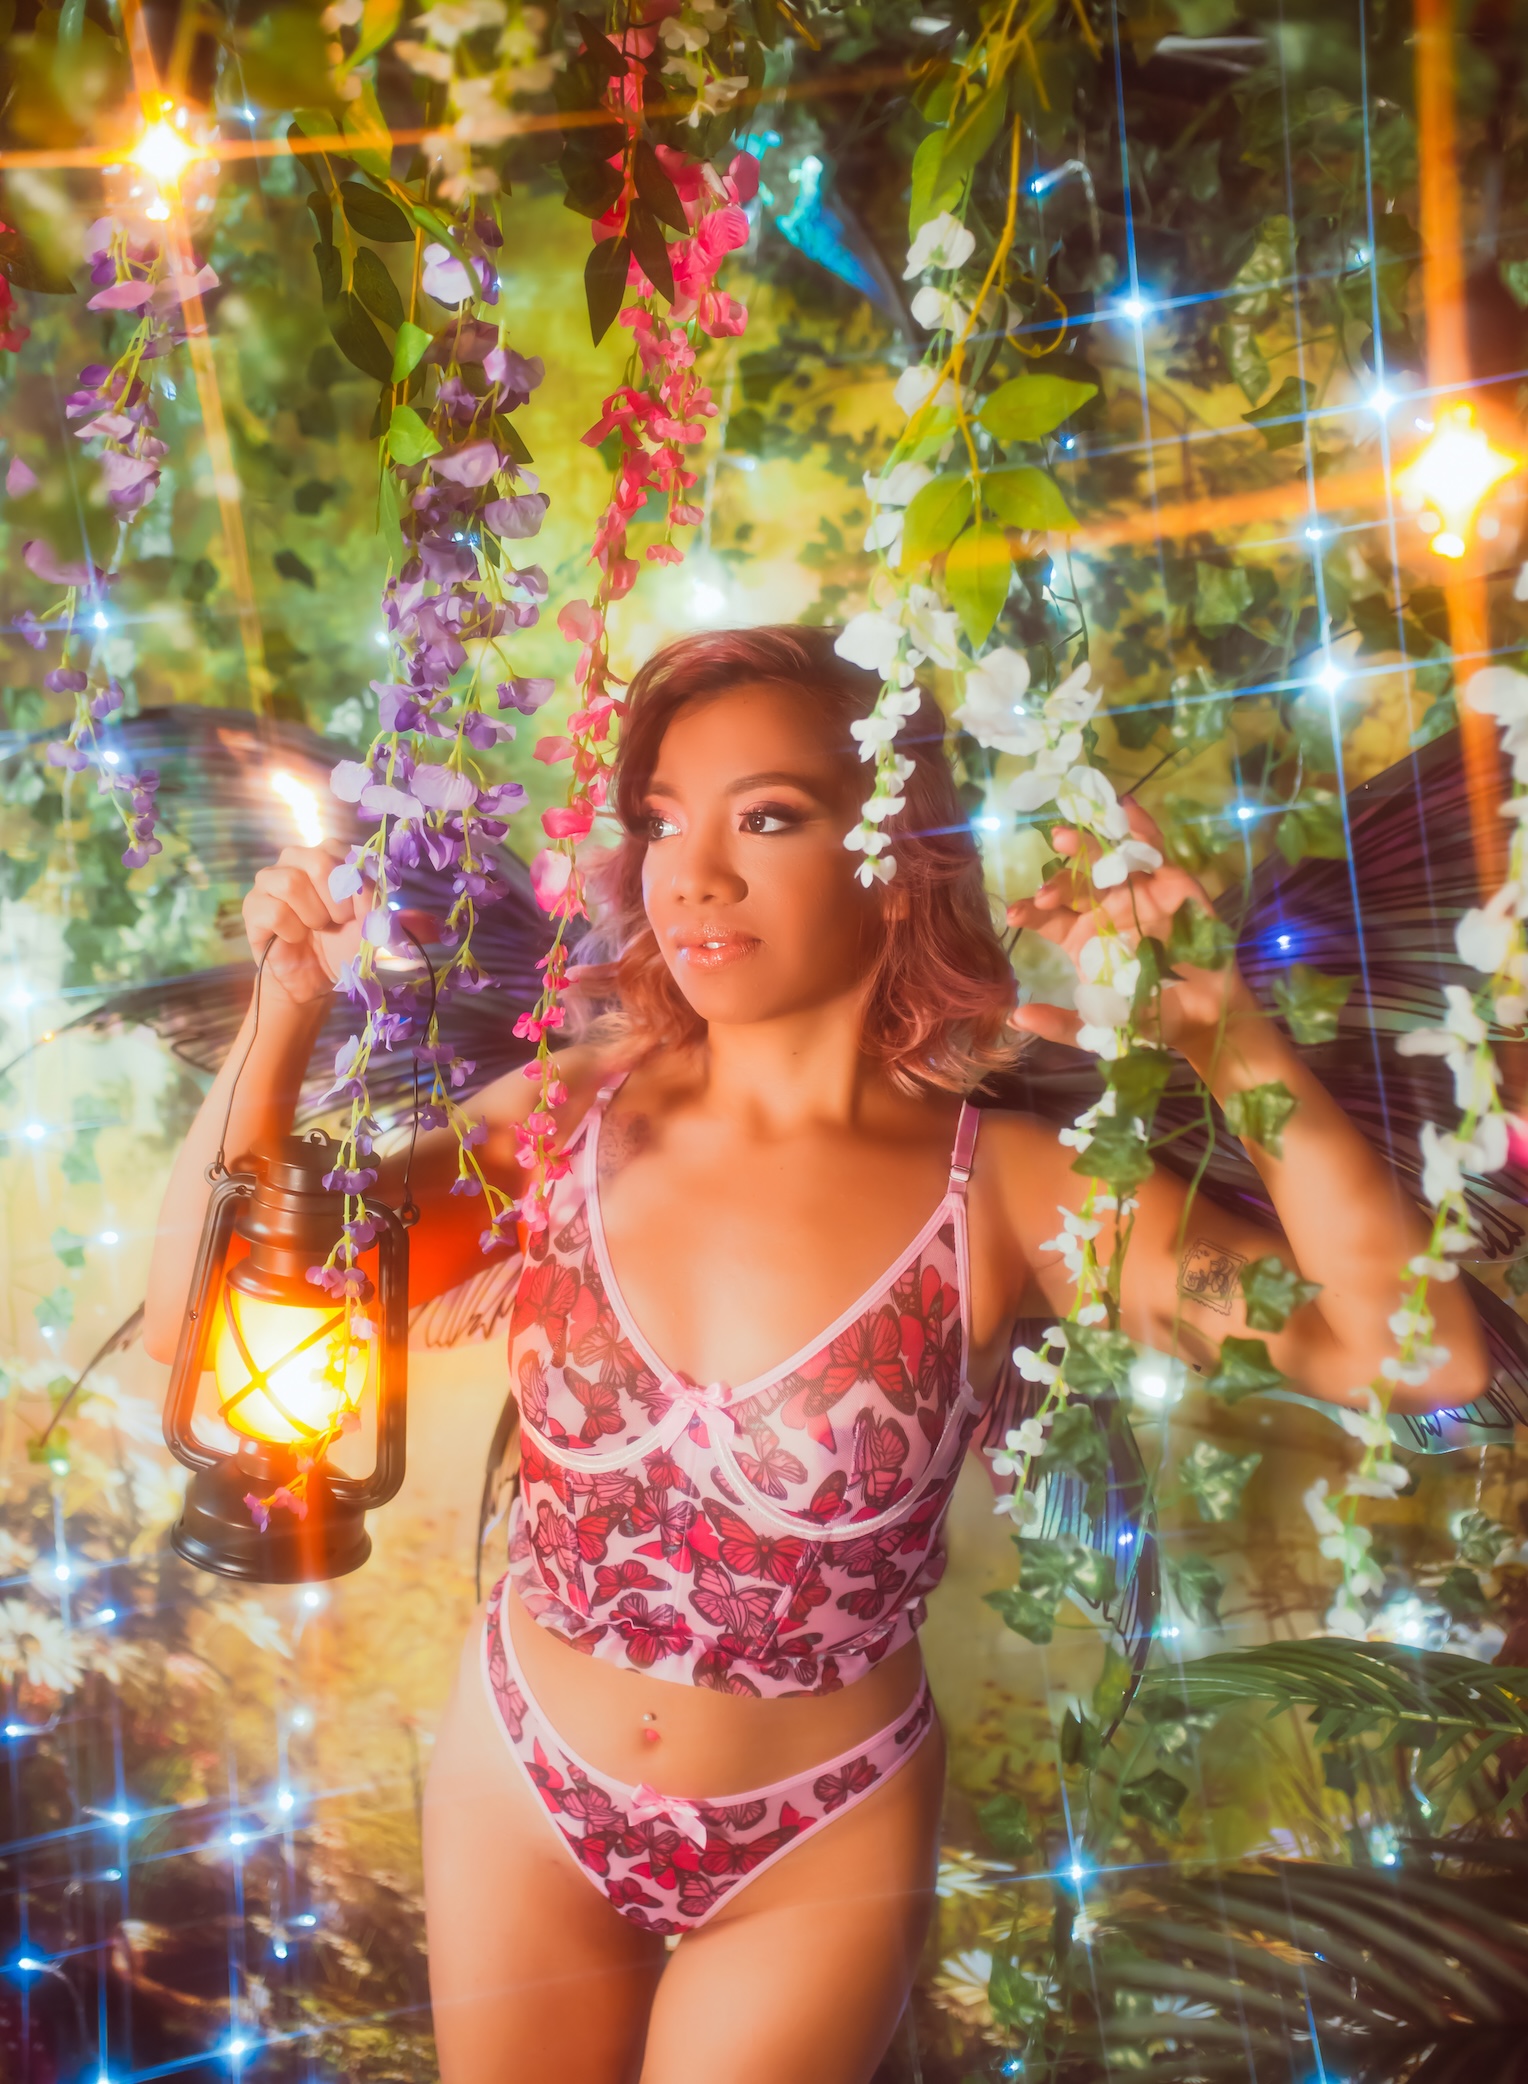 woman in fairy wings and butterfly lingerie standing amongst vines and fairy lights